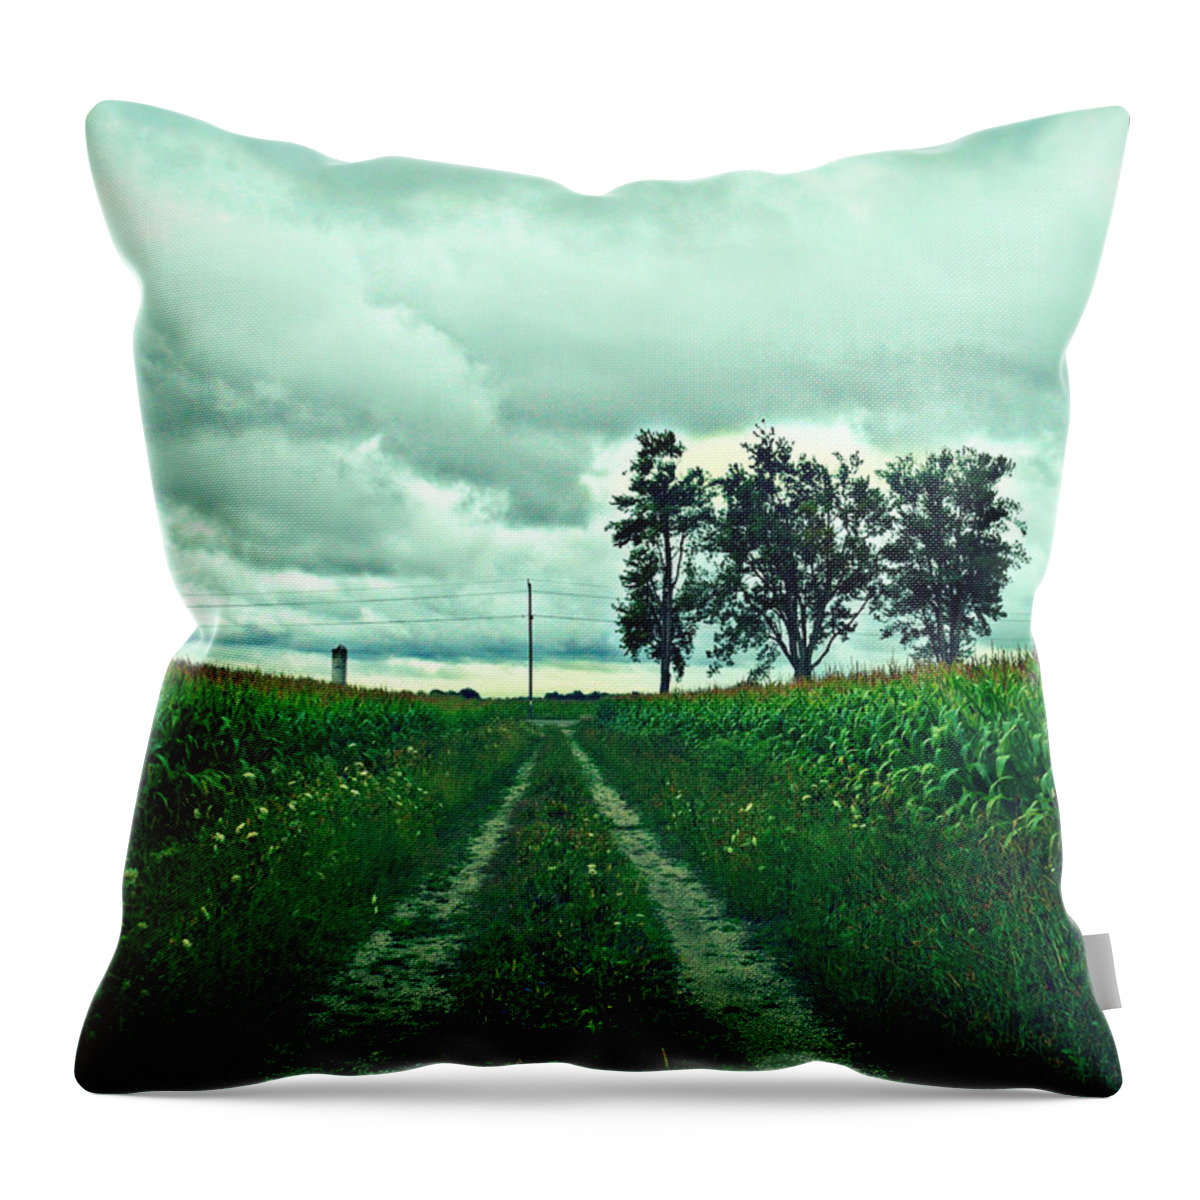 Caressing The Corn Path Throw Pillow featuring the photograph Caressing The Corn Path by Cyryn Fyrcyd